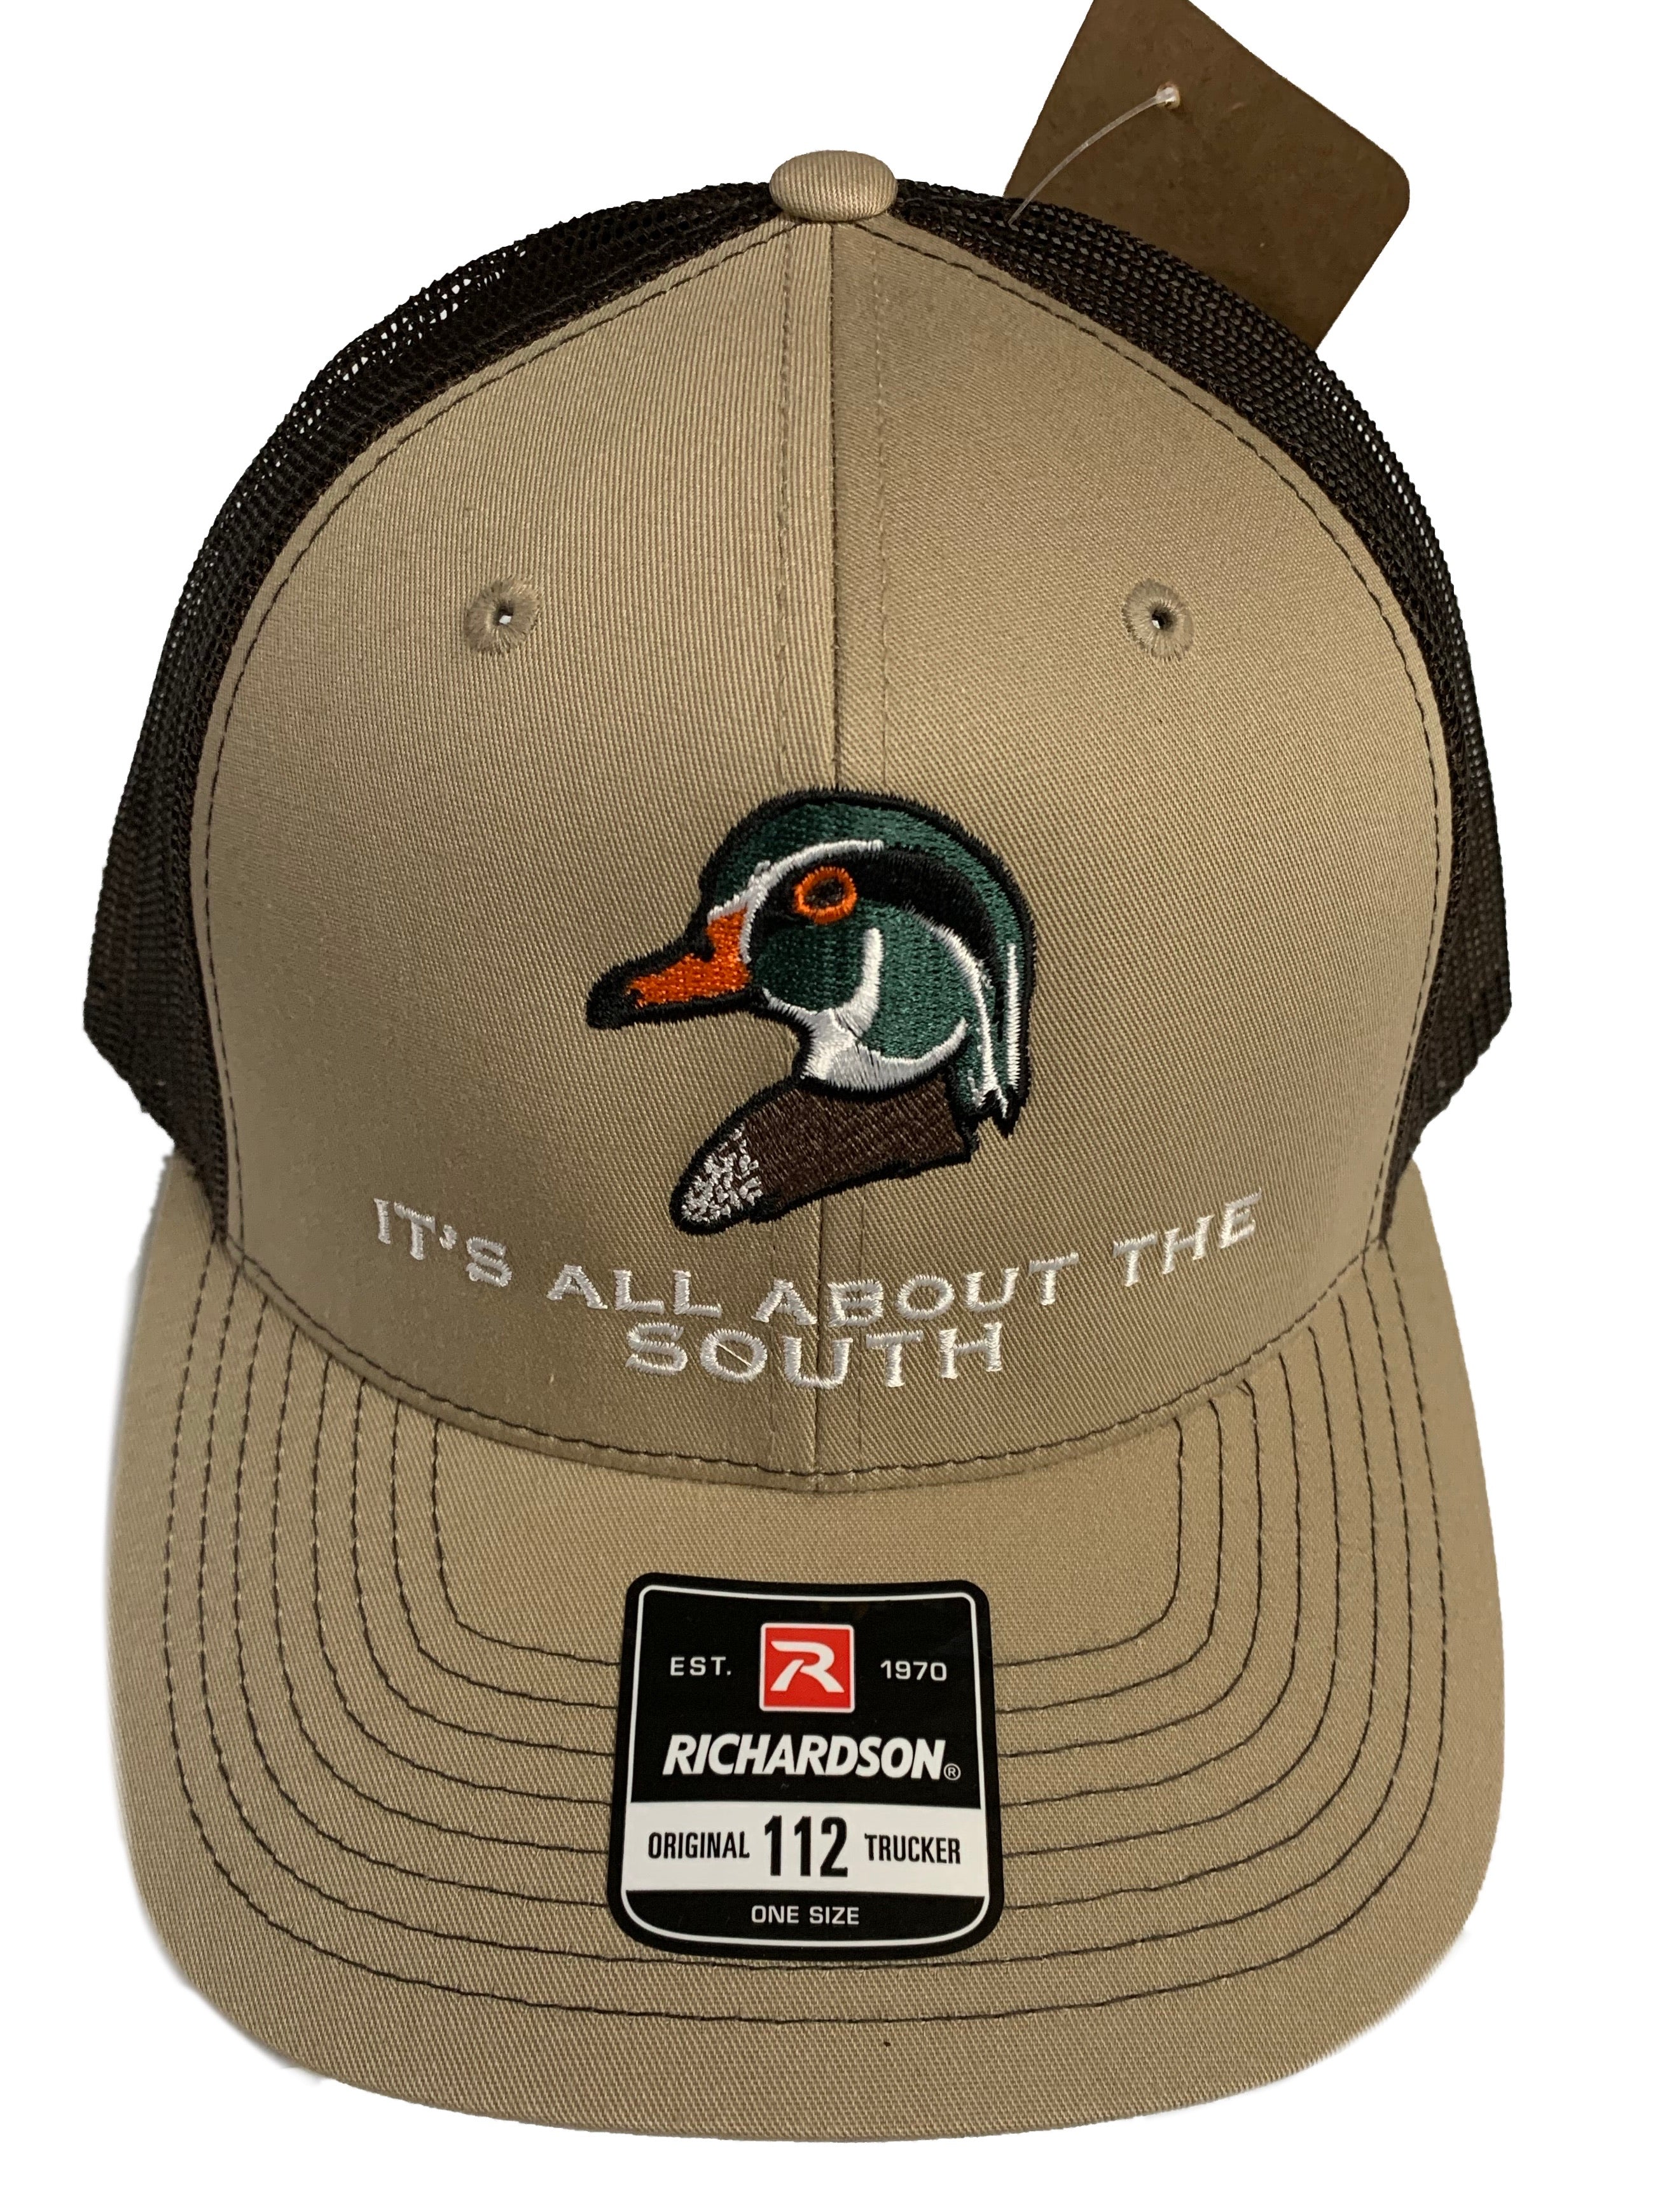 It's All About The South Wood Duck Hat Khaki/Brown